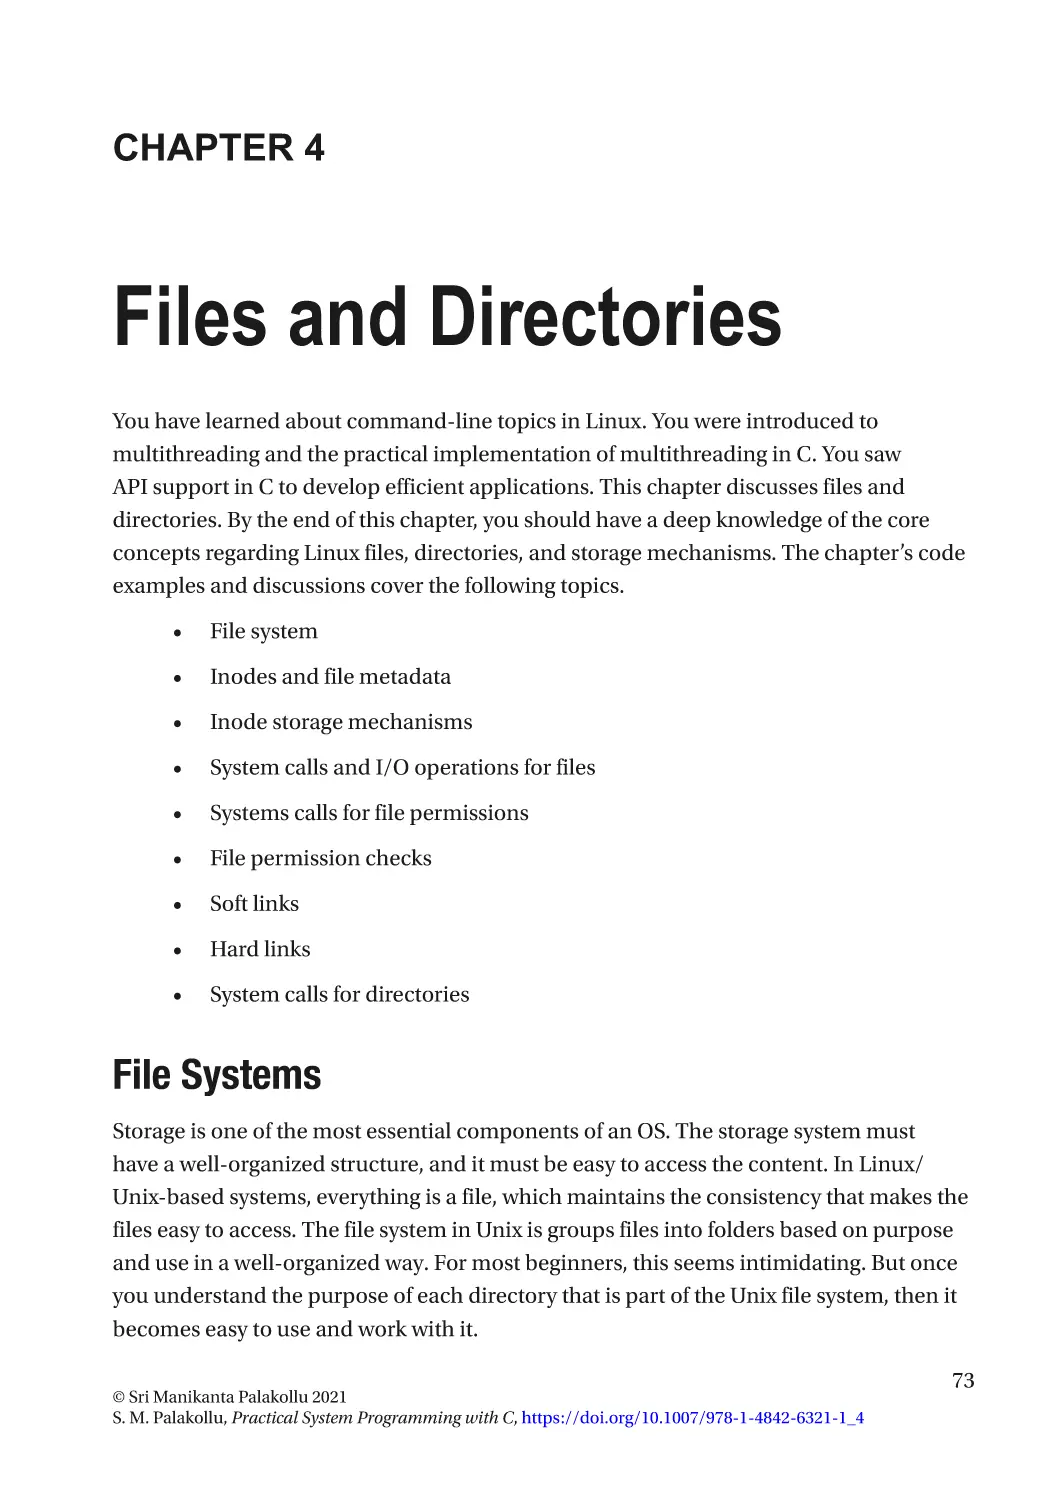 Chapter 4
File Systems